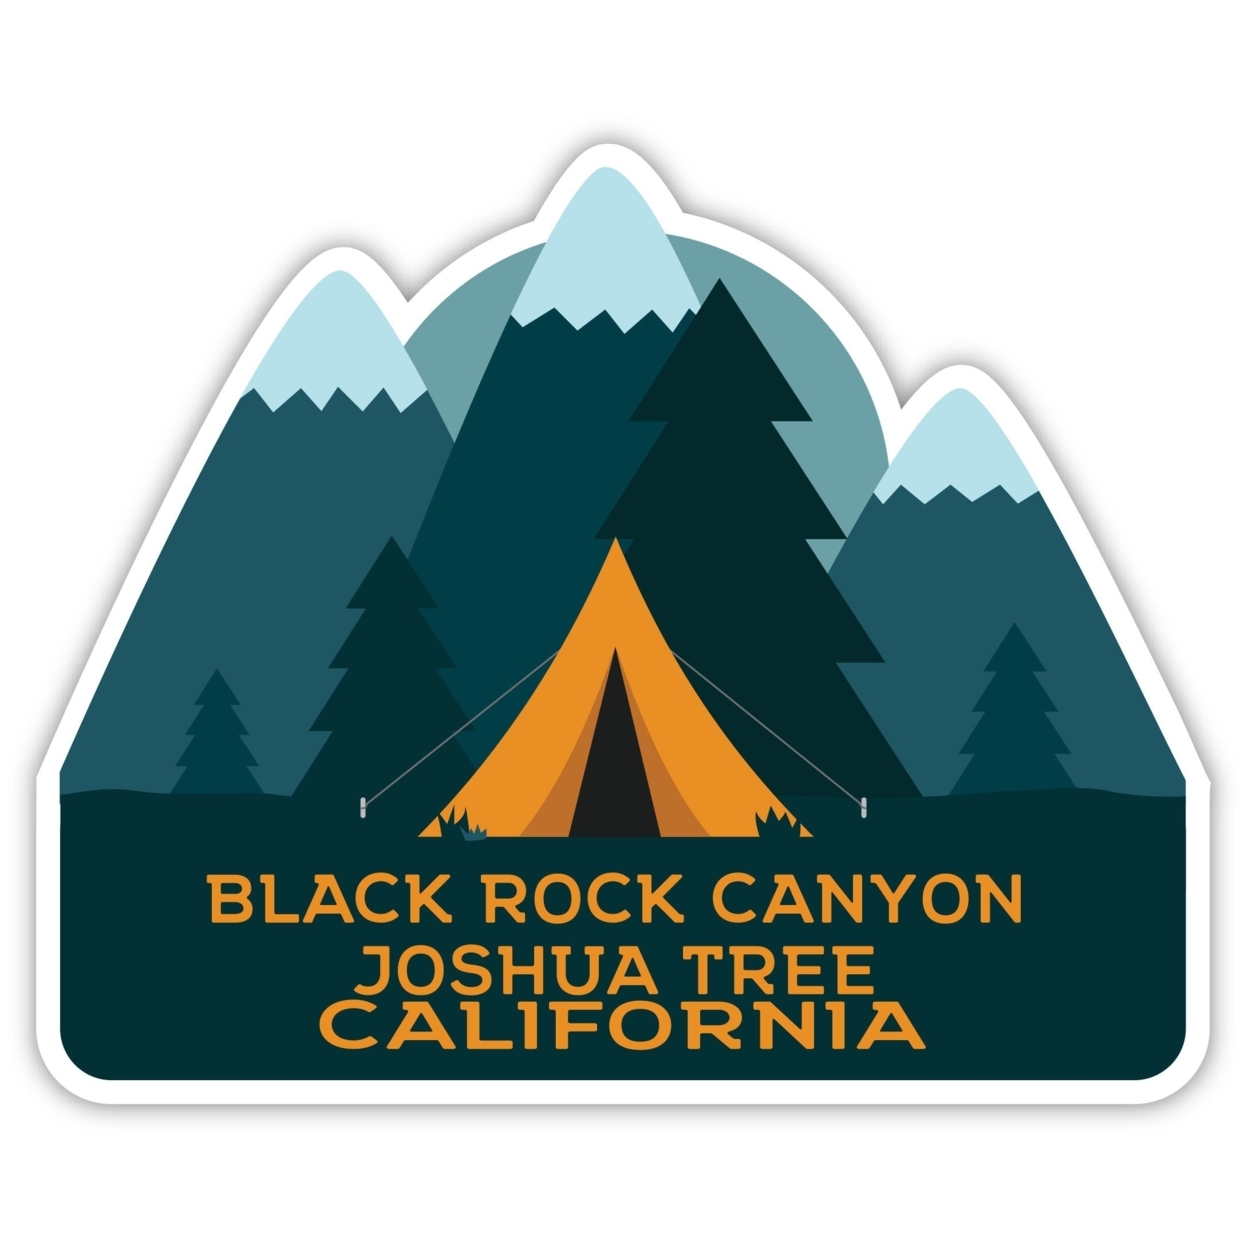 Black Rock Canyon Joshua Tree California Souvenir Decorative Stickers (Choose Theme And Size) - 4-Pack, 2-Inch, Tent